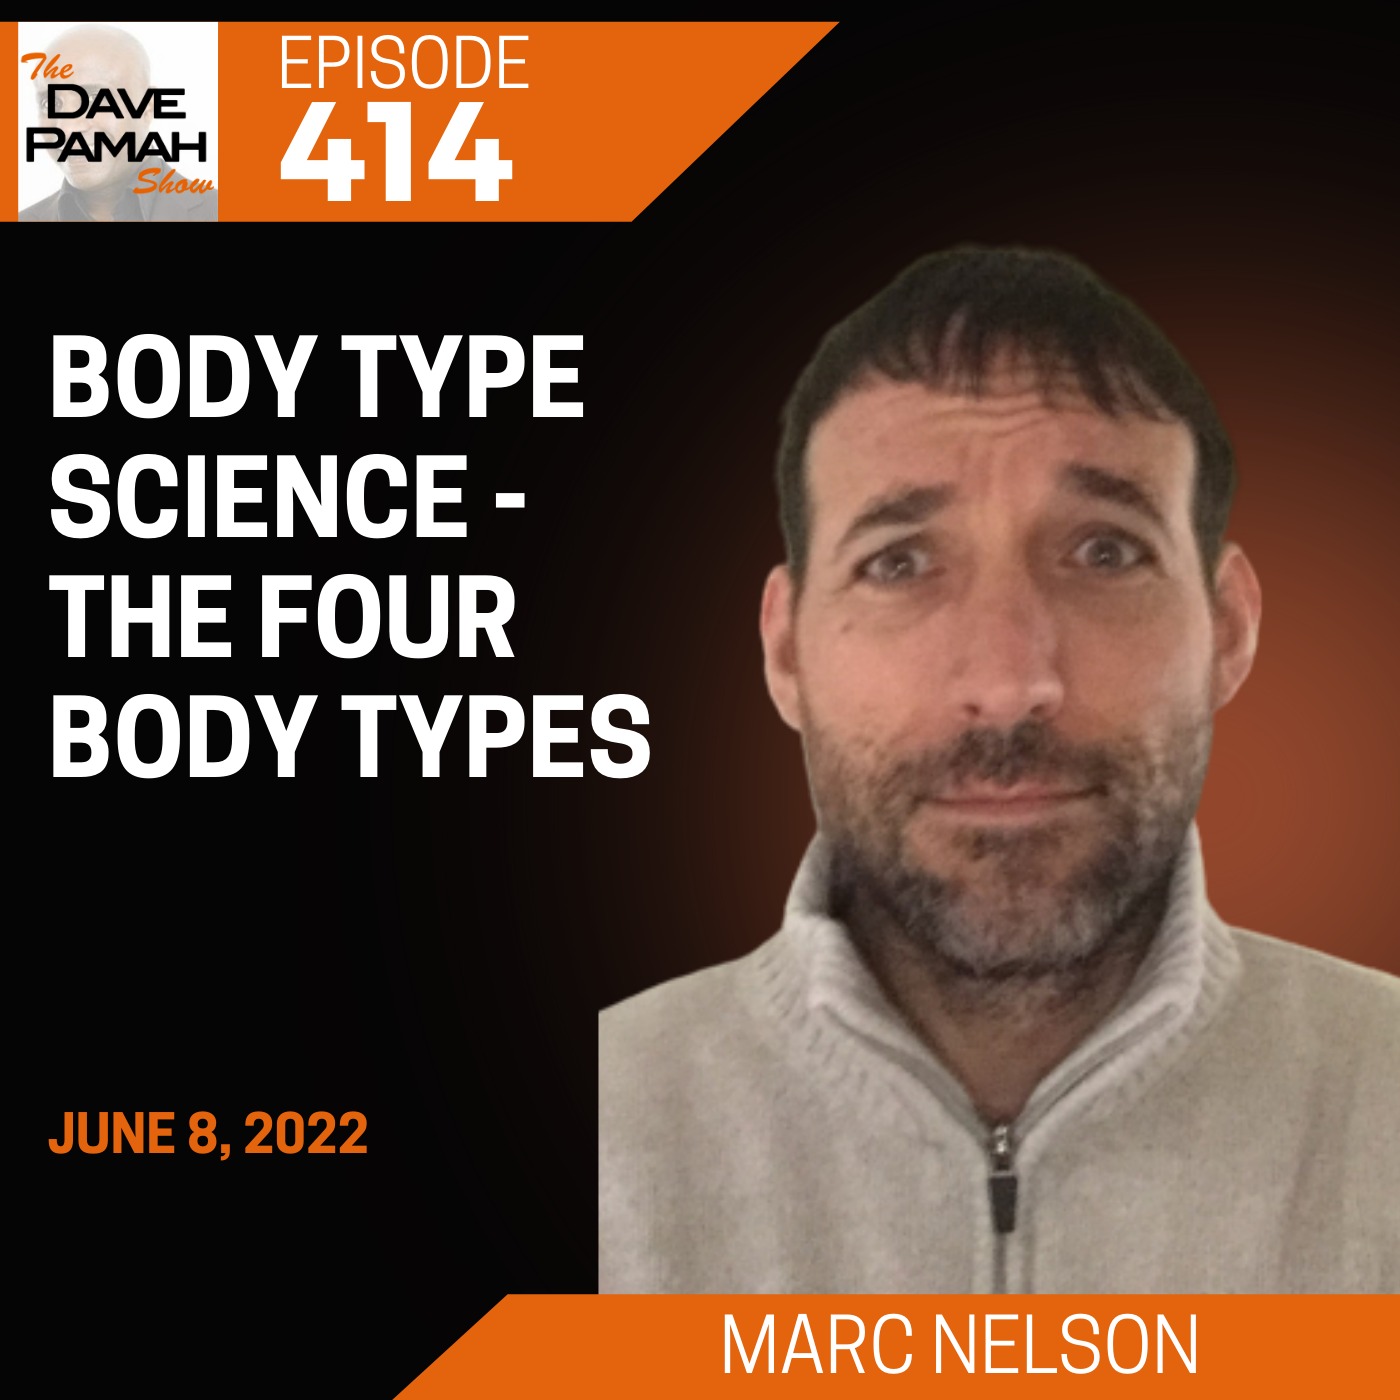 Body Type Science - The Four Body Types with Marc Nelson Image